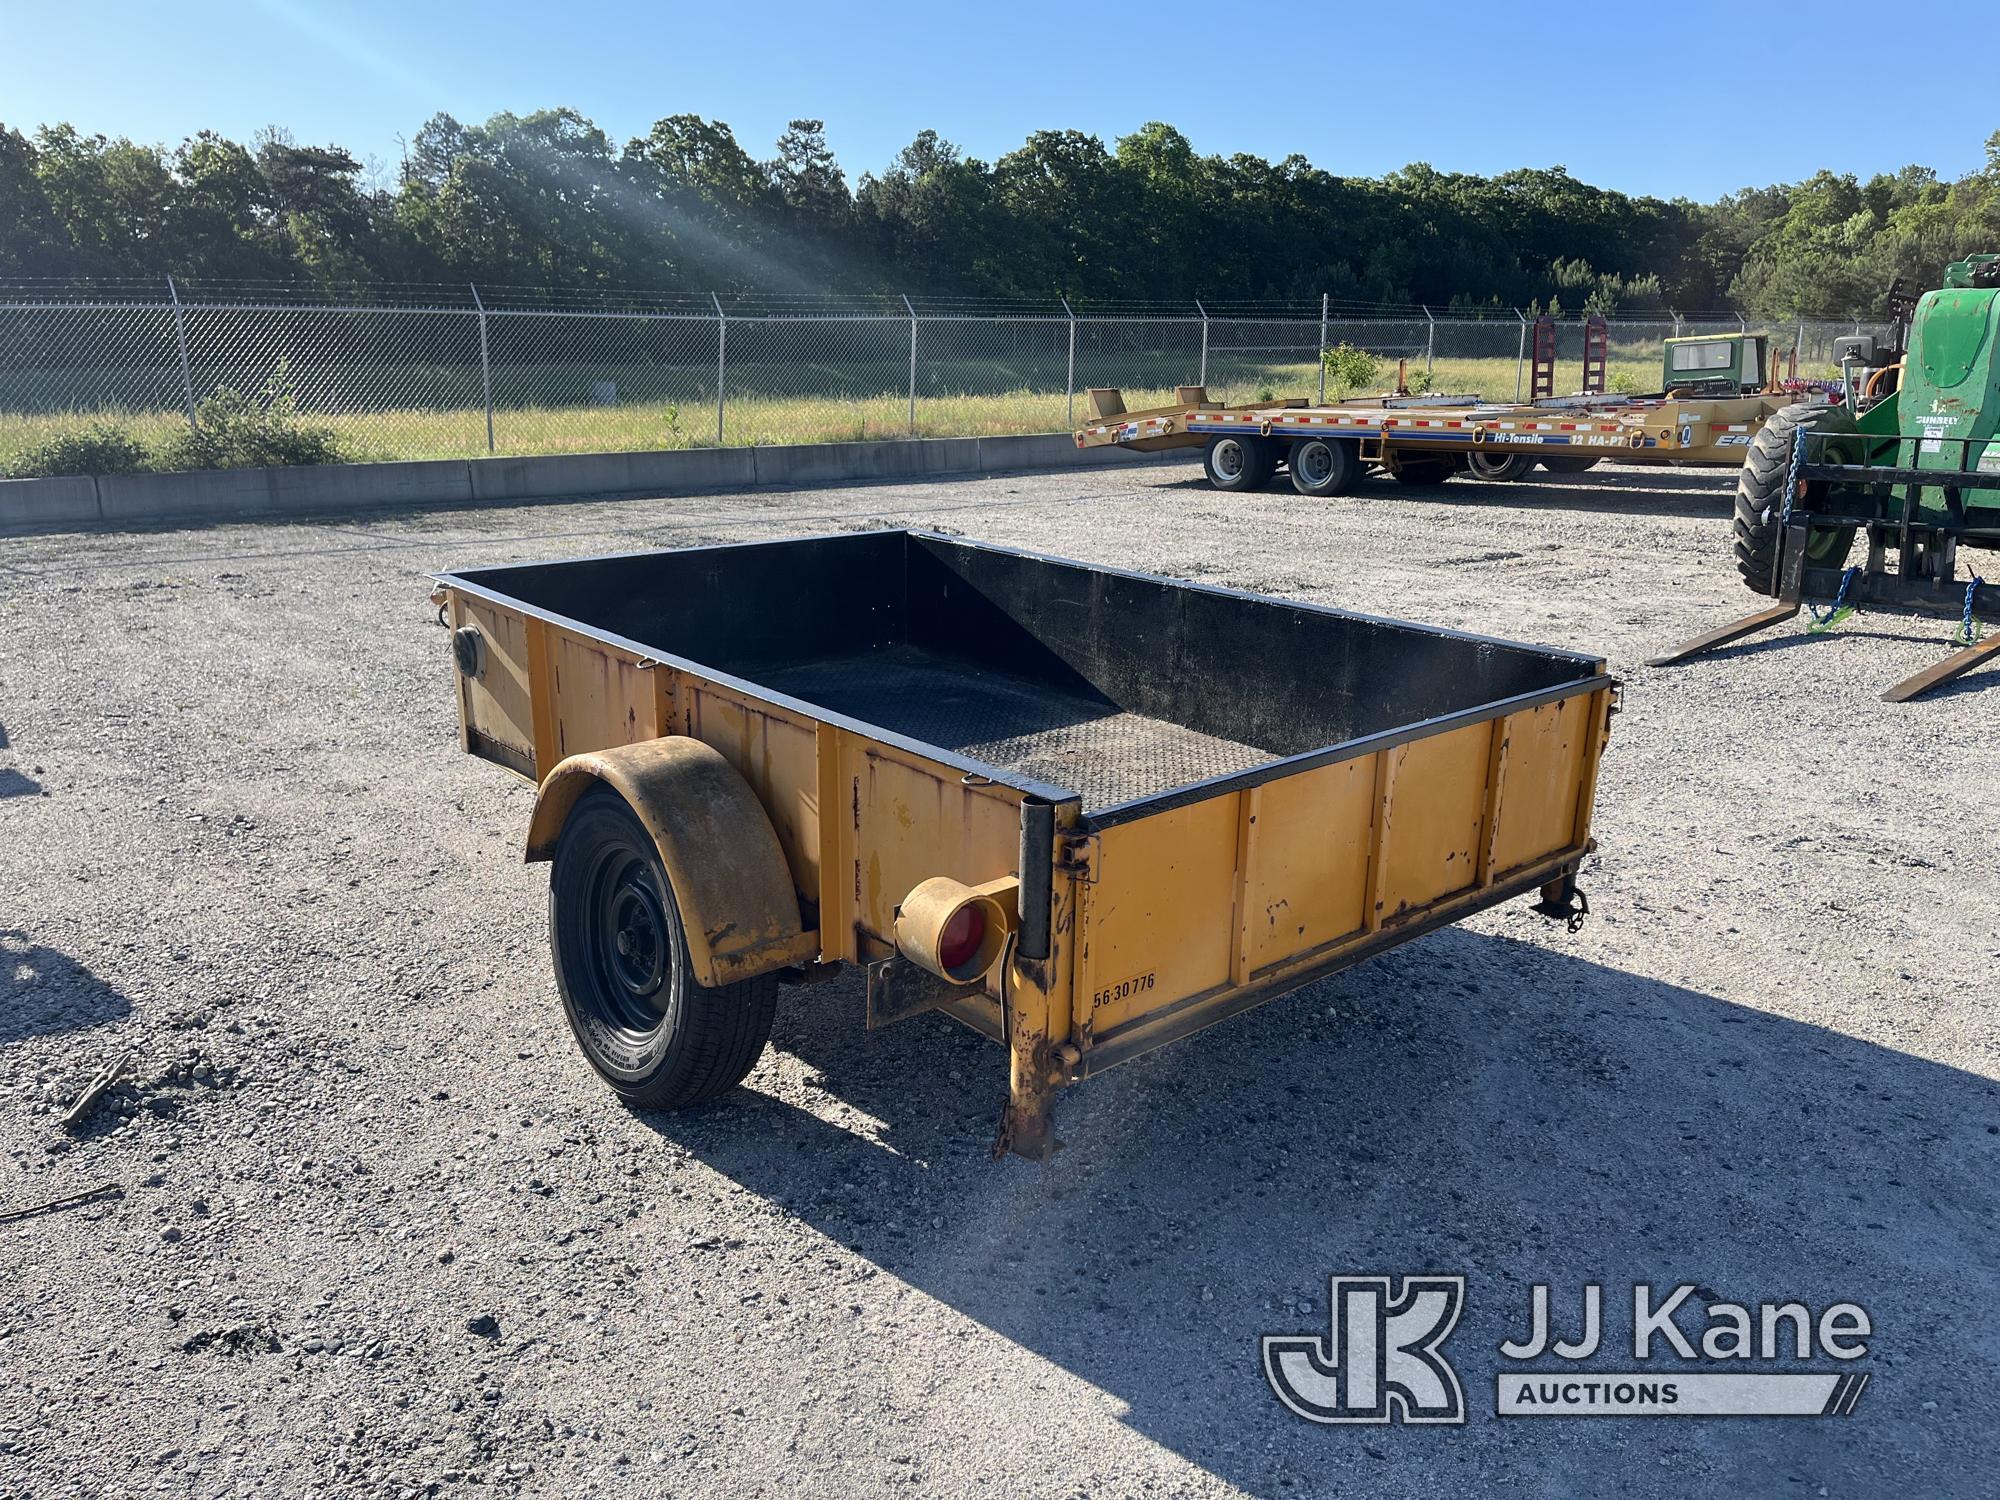 (Chester, VA) 1988 Utility Trailer Manufacturing Co. S/A Material Trailer Bent Axle